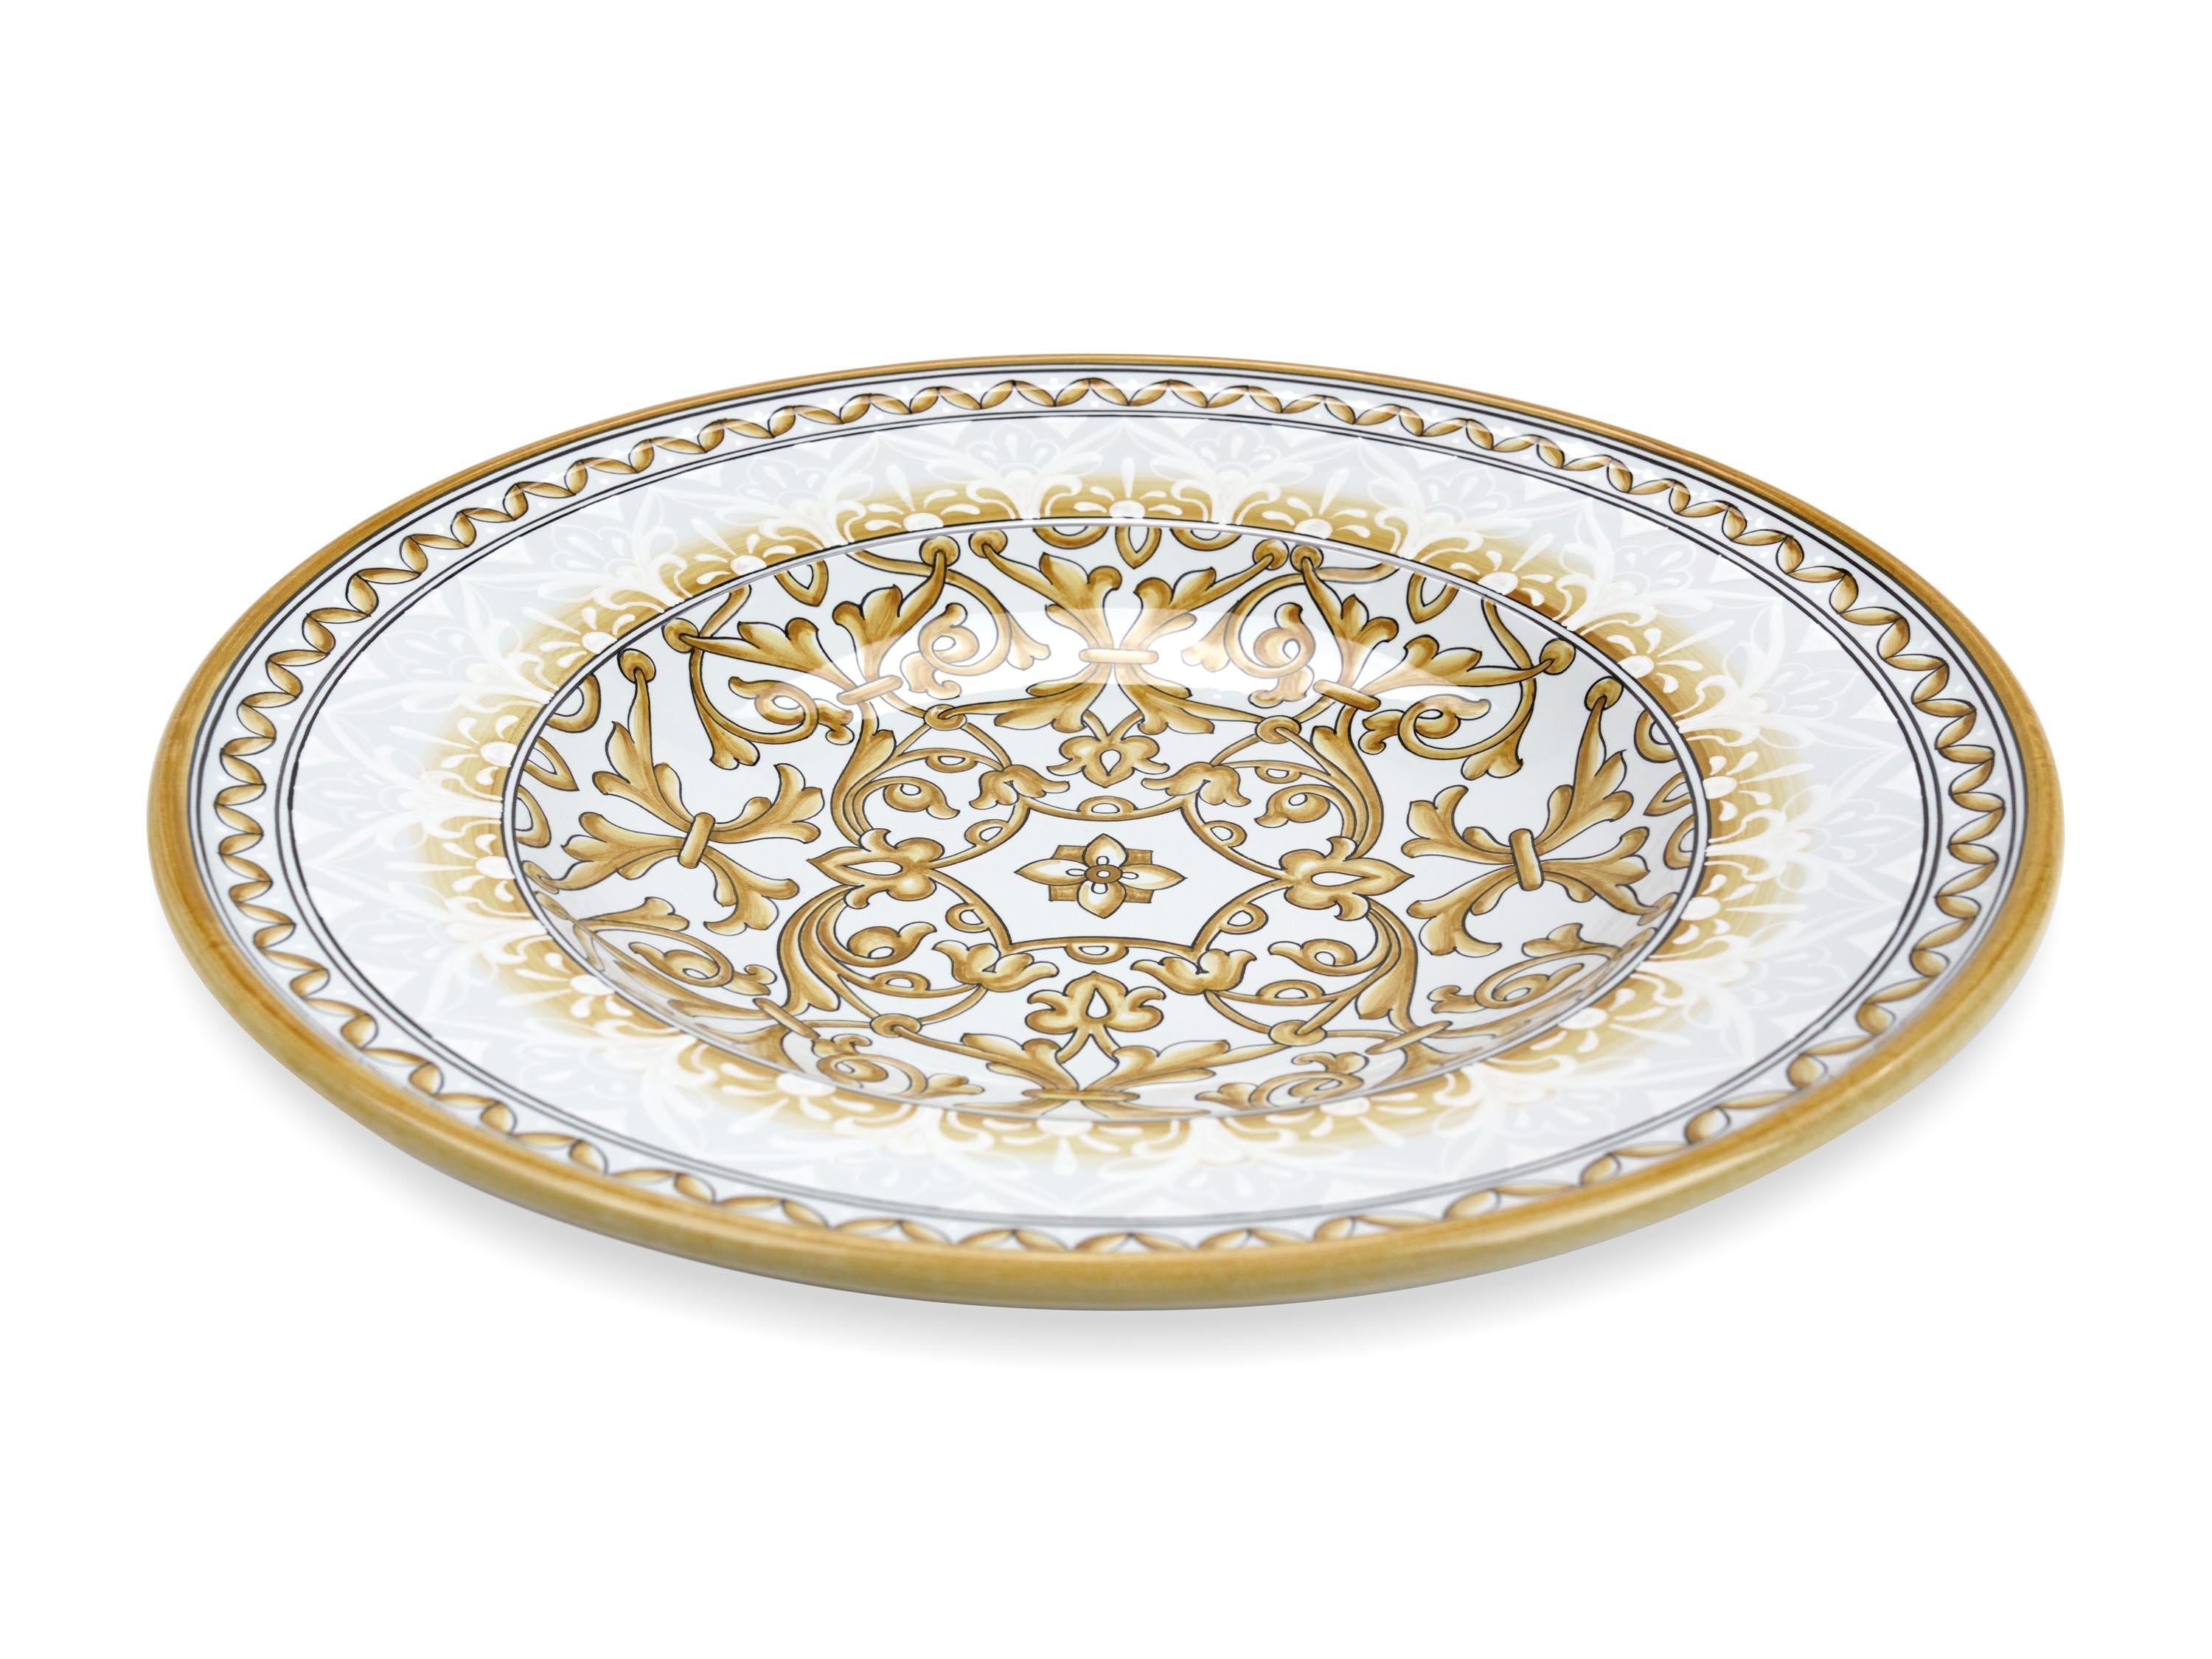 Ceramic Plate Centerpiece Tray Ornament Bowl Wall Dish Majolica White Decorated In Stock For Sale